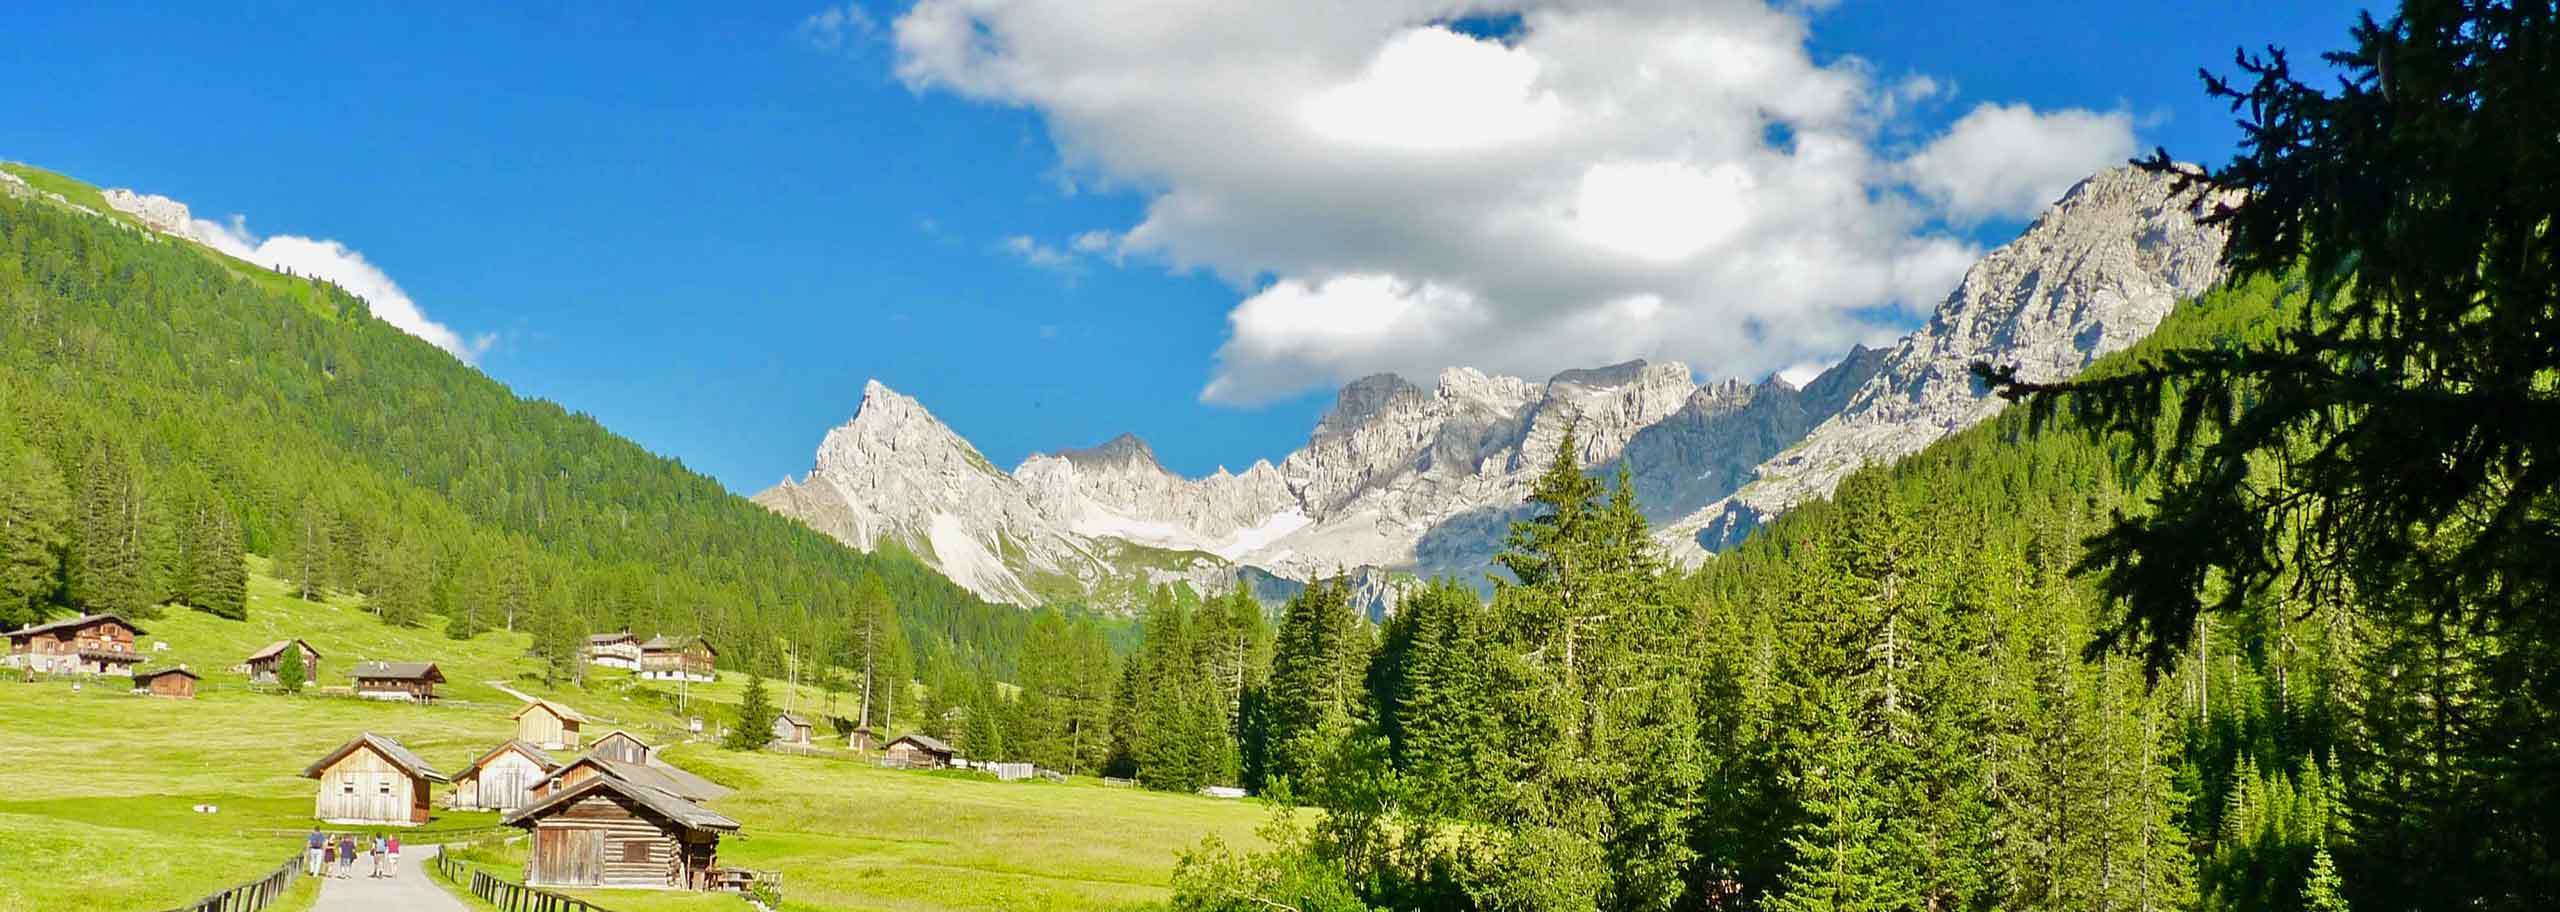 Hiking in Brenta Dolomites, Trekking with a Mountain Guide